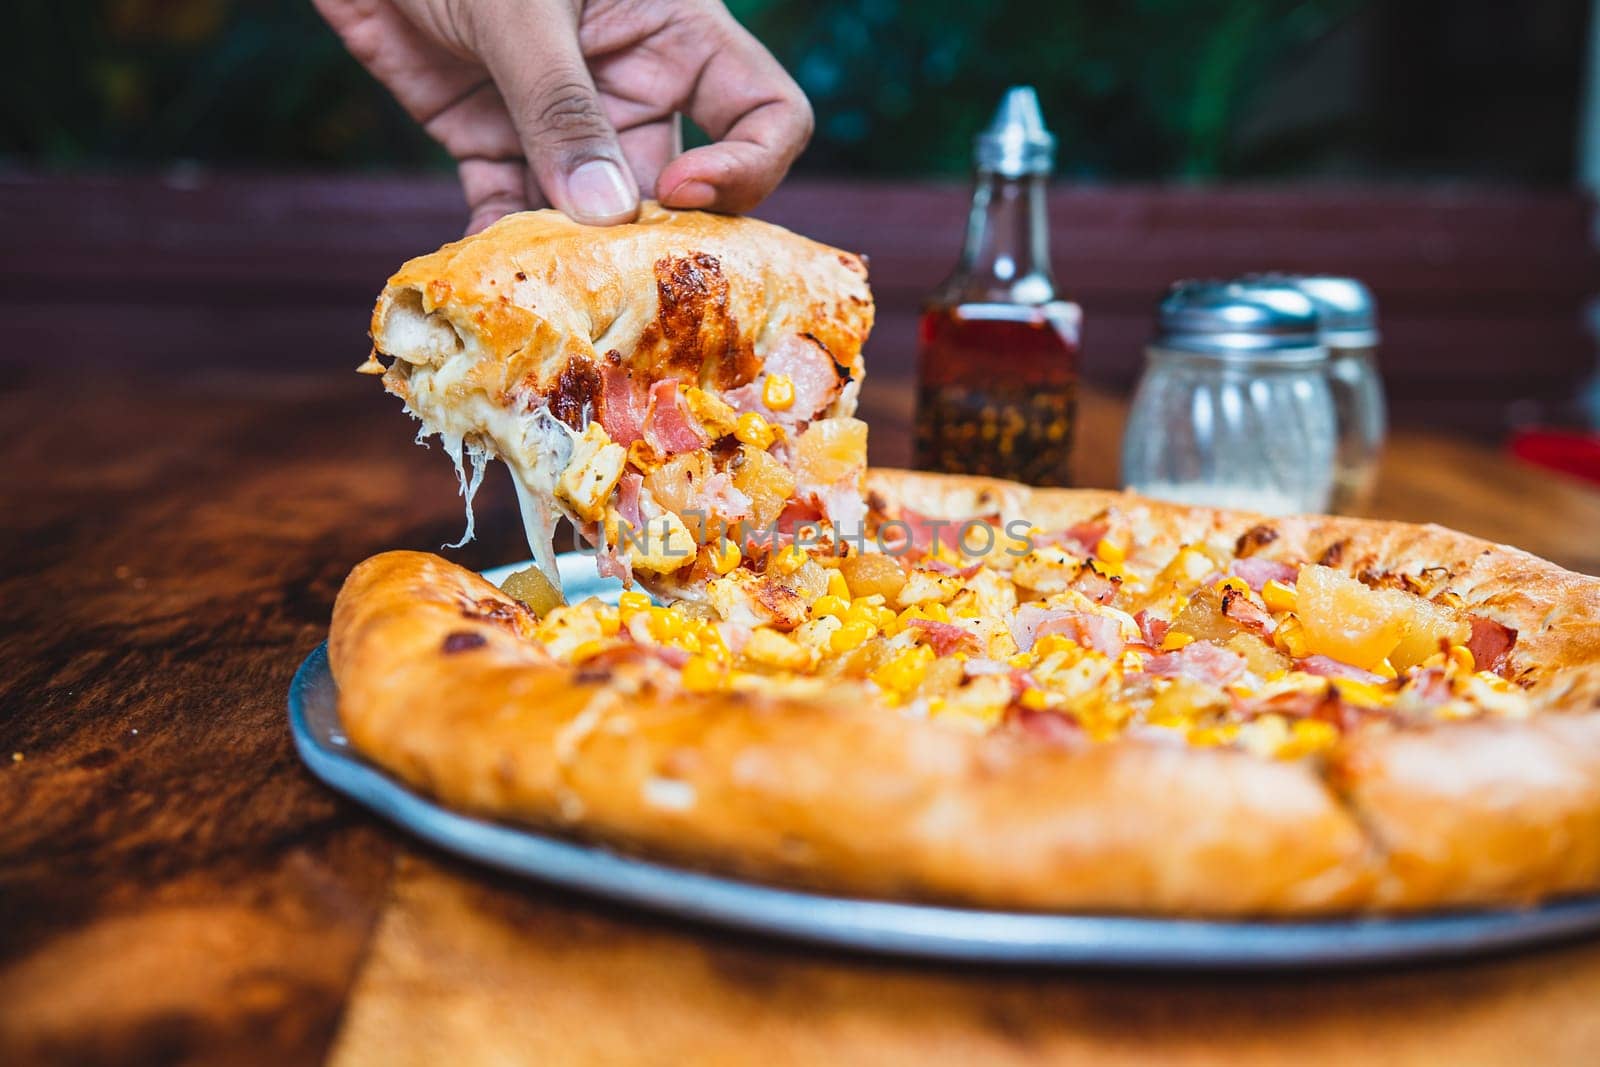 Homemade ham pizza with cheese and sweet corn served on wooden table. Hand taking a slice of ham and sweetcorn pizza by isaiphoto